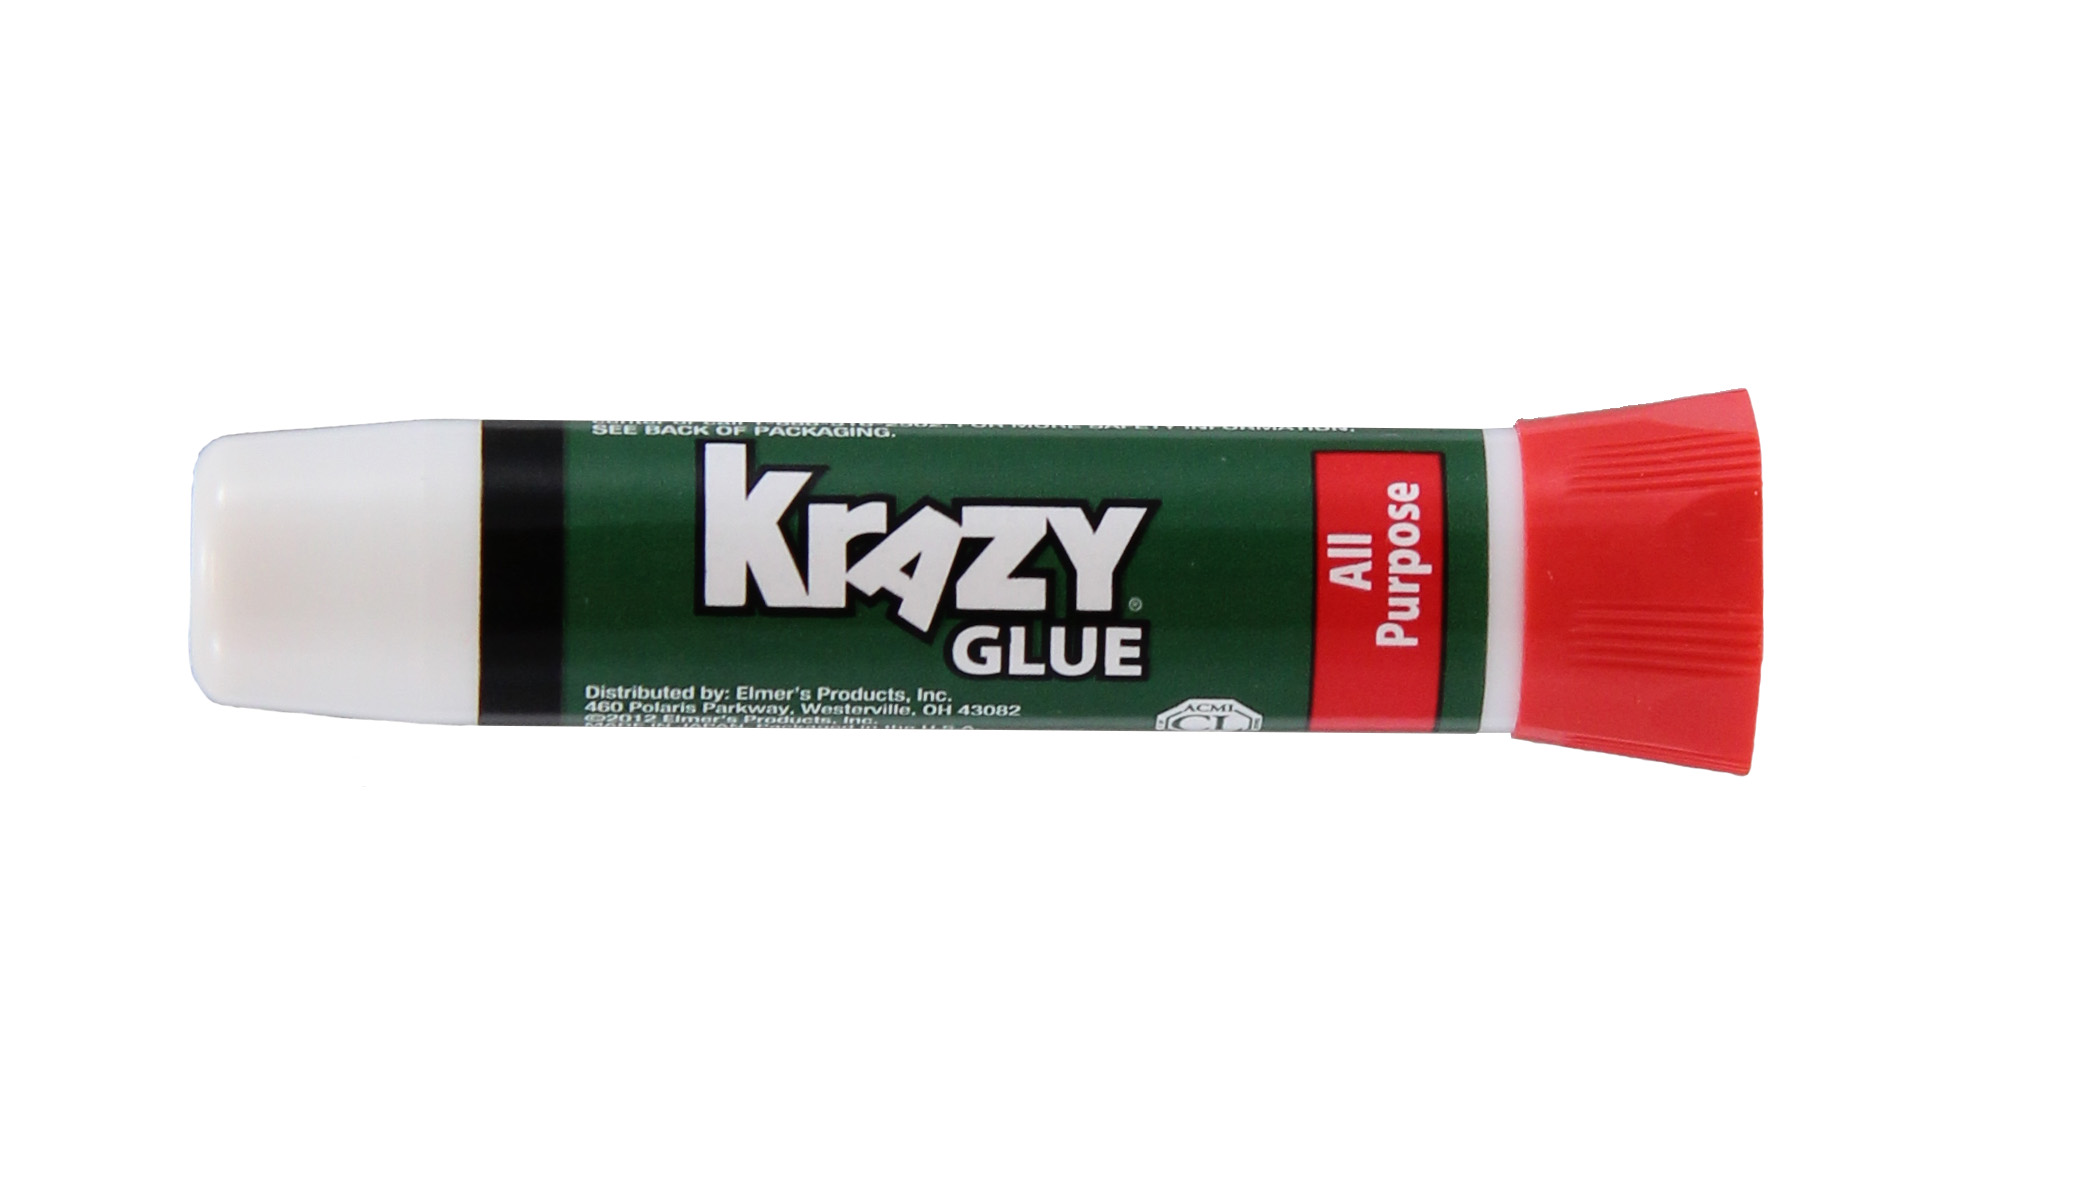 Krazy Glue® provides the fastest bonds needed to instantly make, create and do krazy things - just a single drop of Krazy Glue can hold up to 1,000 pounds.